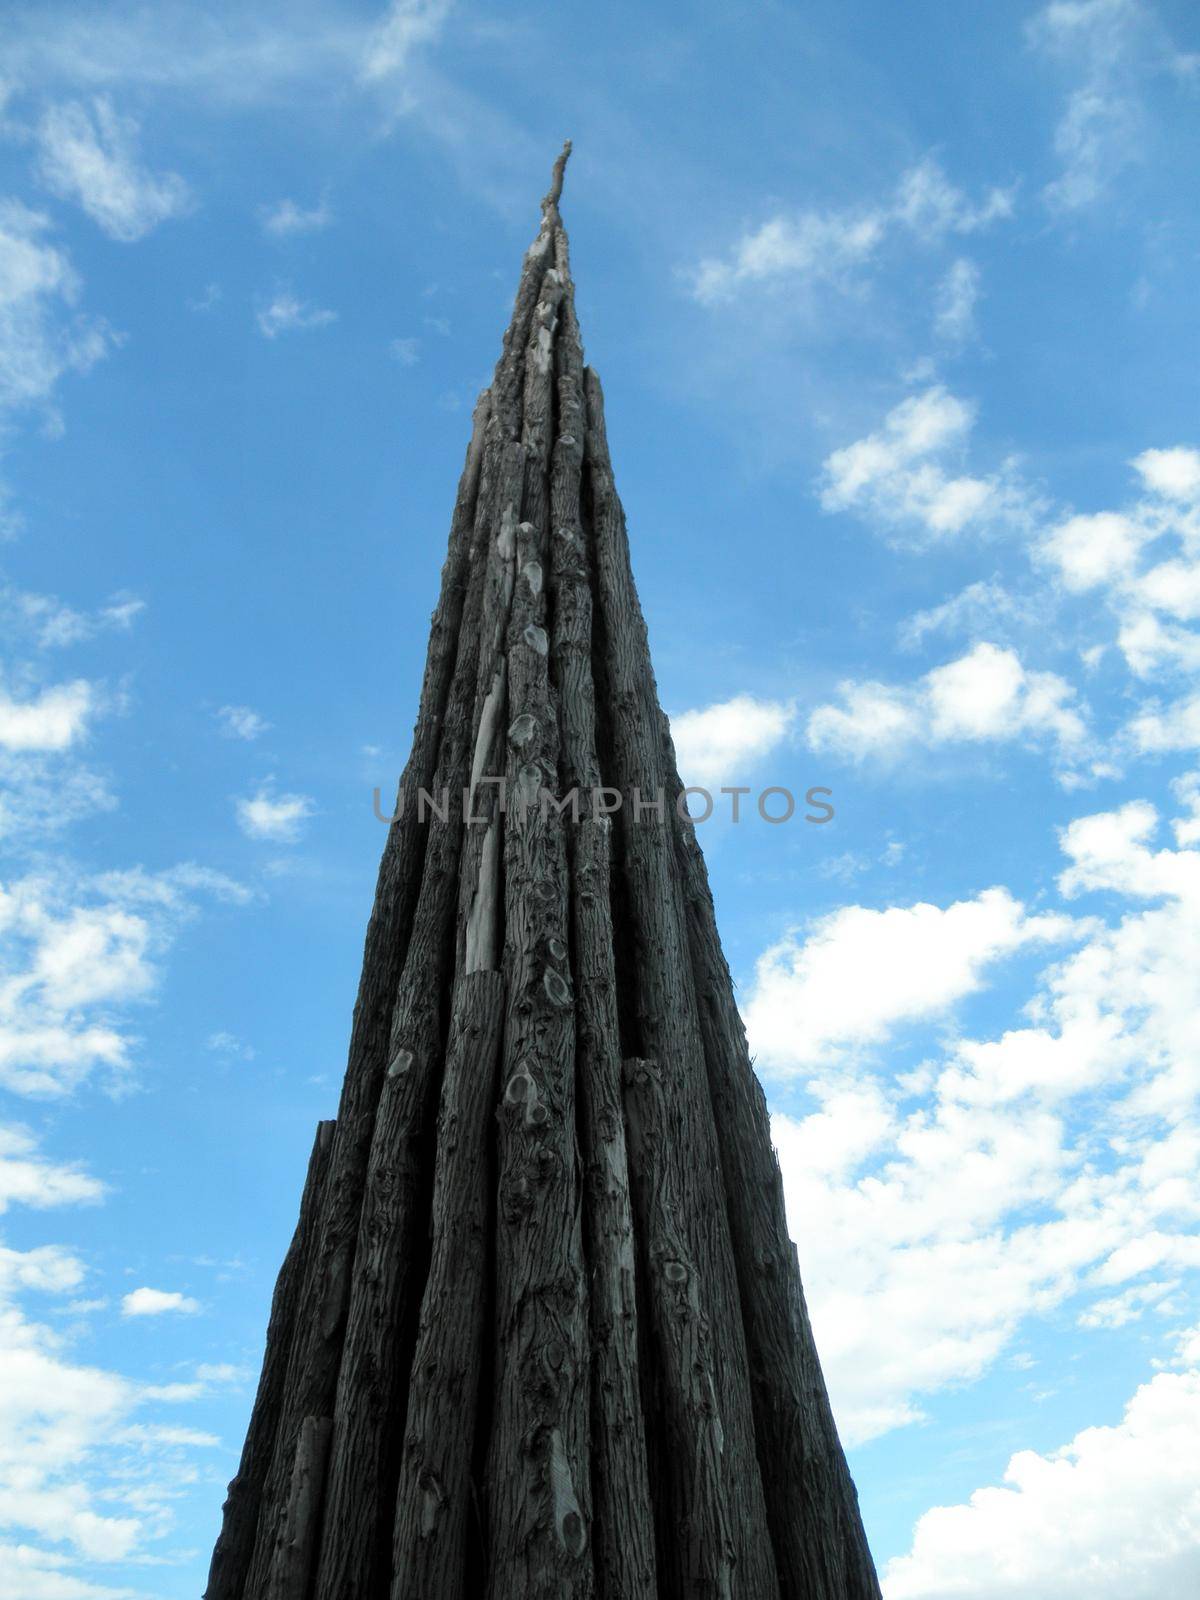 Andy Goldsworthy's Spire  by EricGBVD